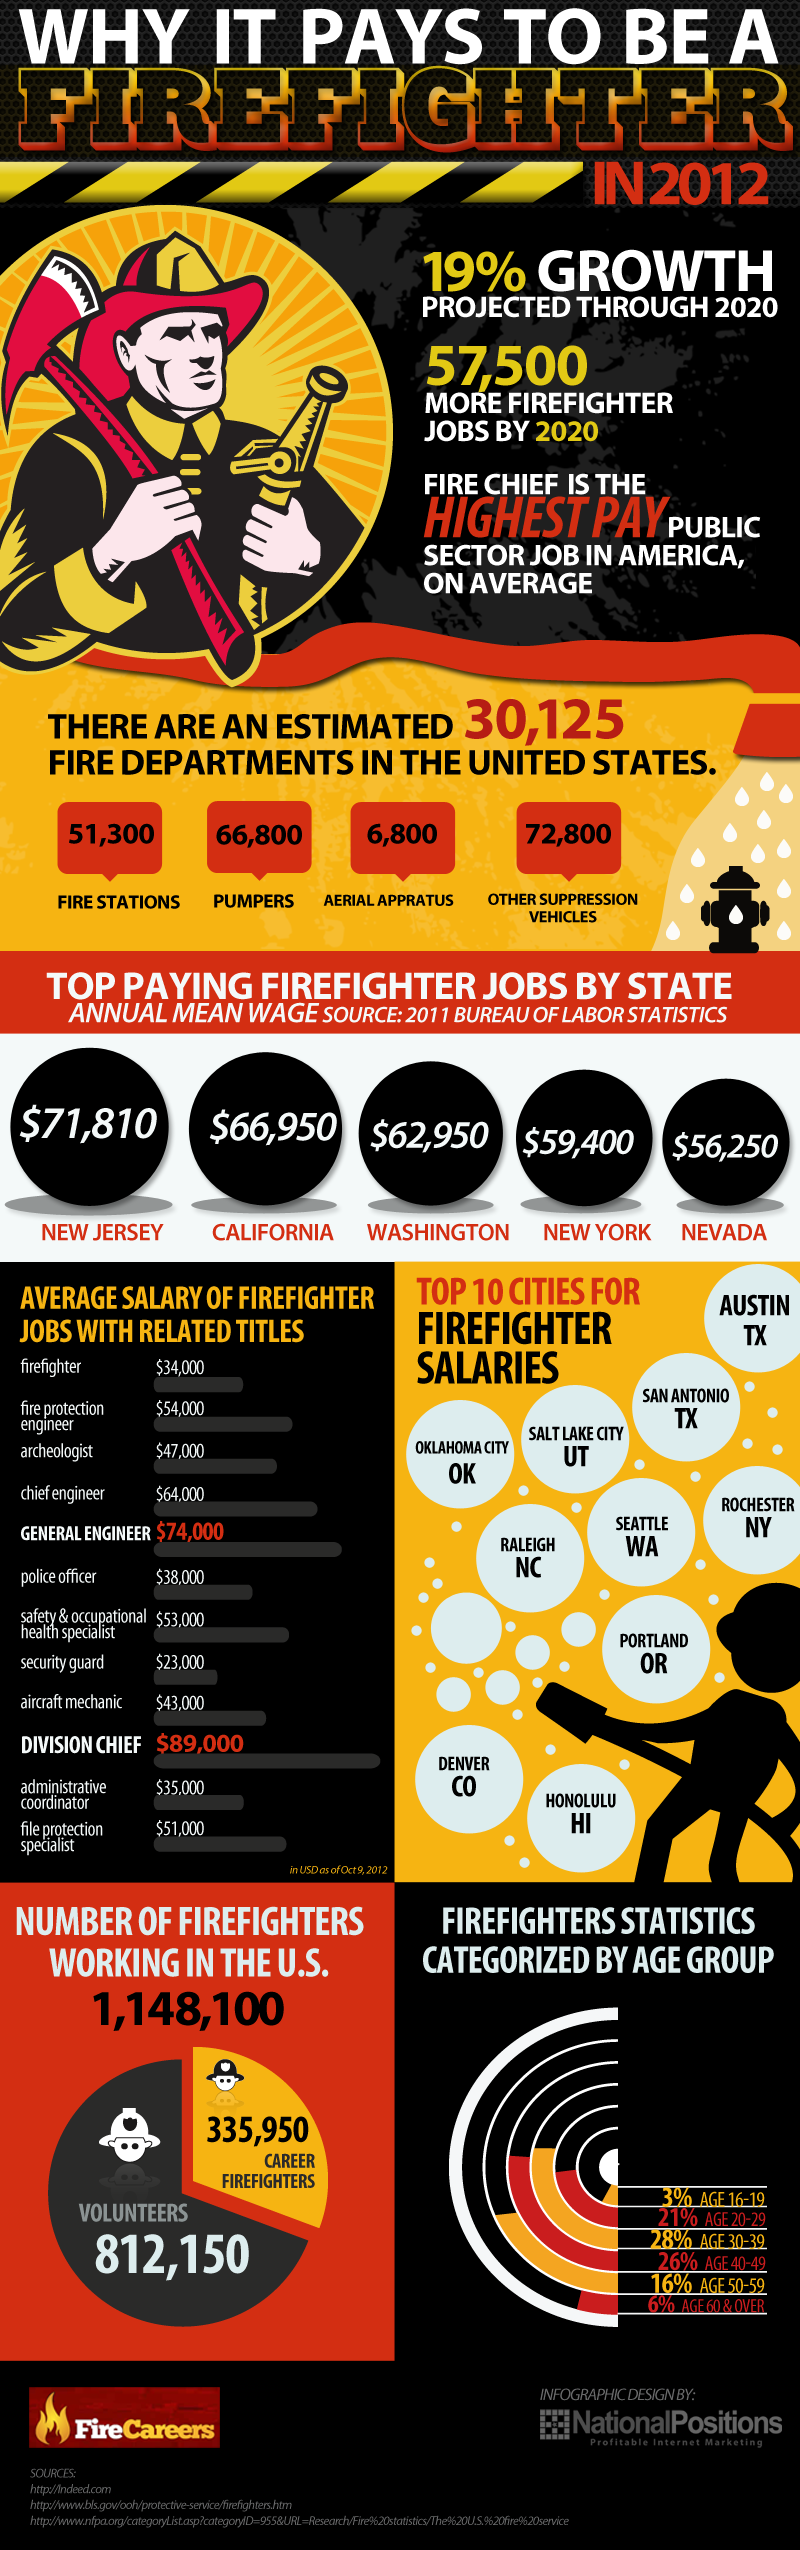 Why it pays to be a Firefighter